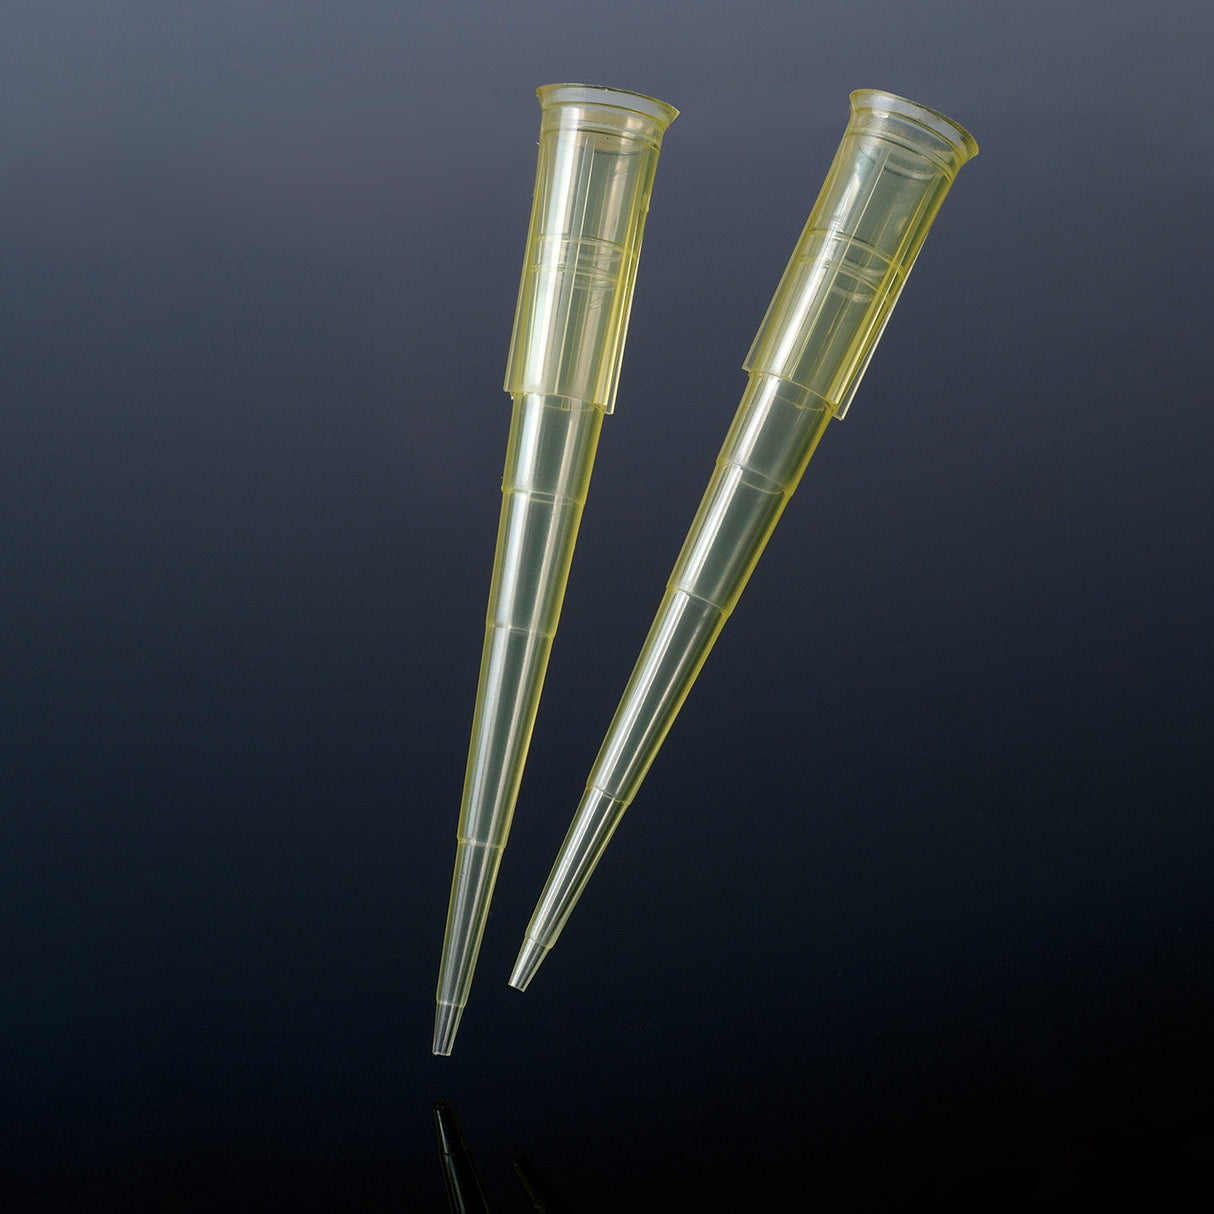 LaboQuip Pipette Tips 200μl (960 Tips), Universal, Sterile, DNase& RNase Free, Yellow, Racked